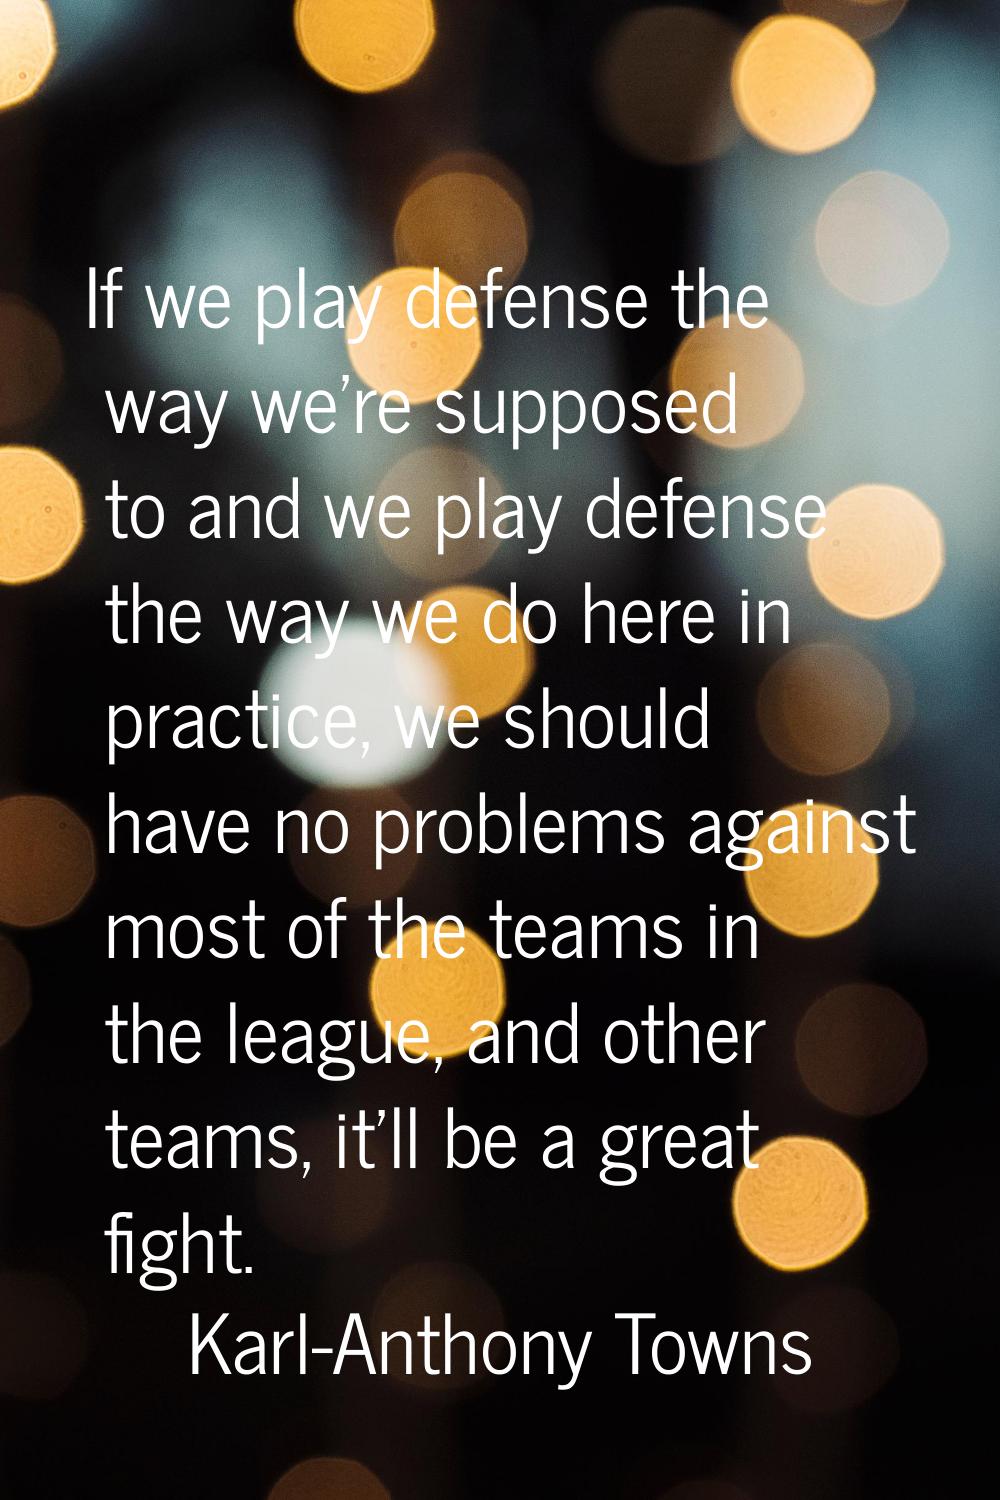 If we play defense the way we're supposed to and we play defense the way we do here in practice, we